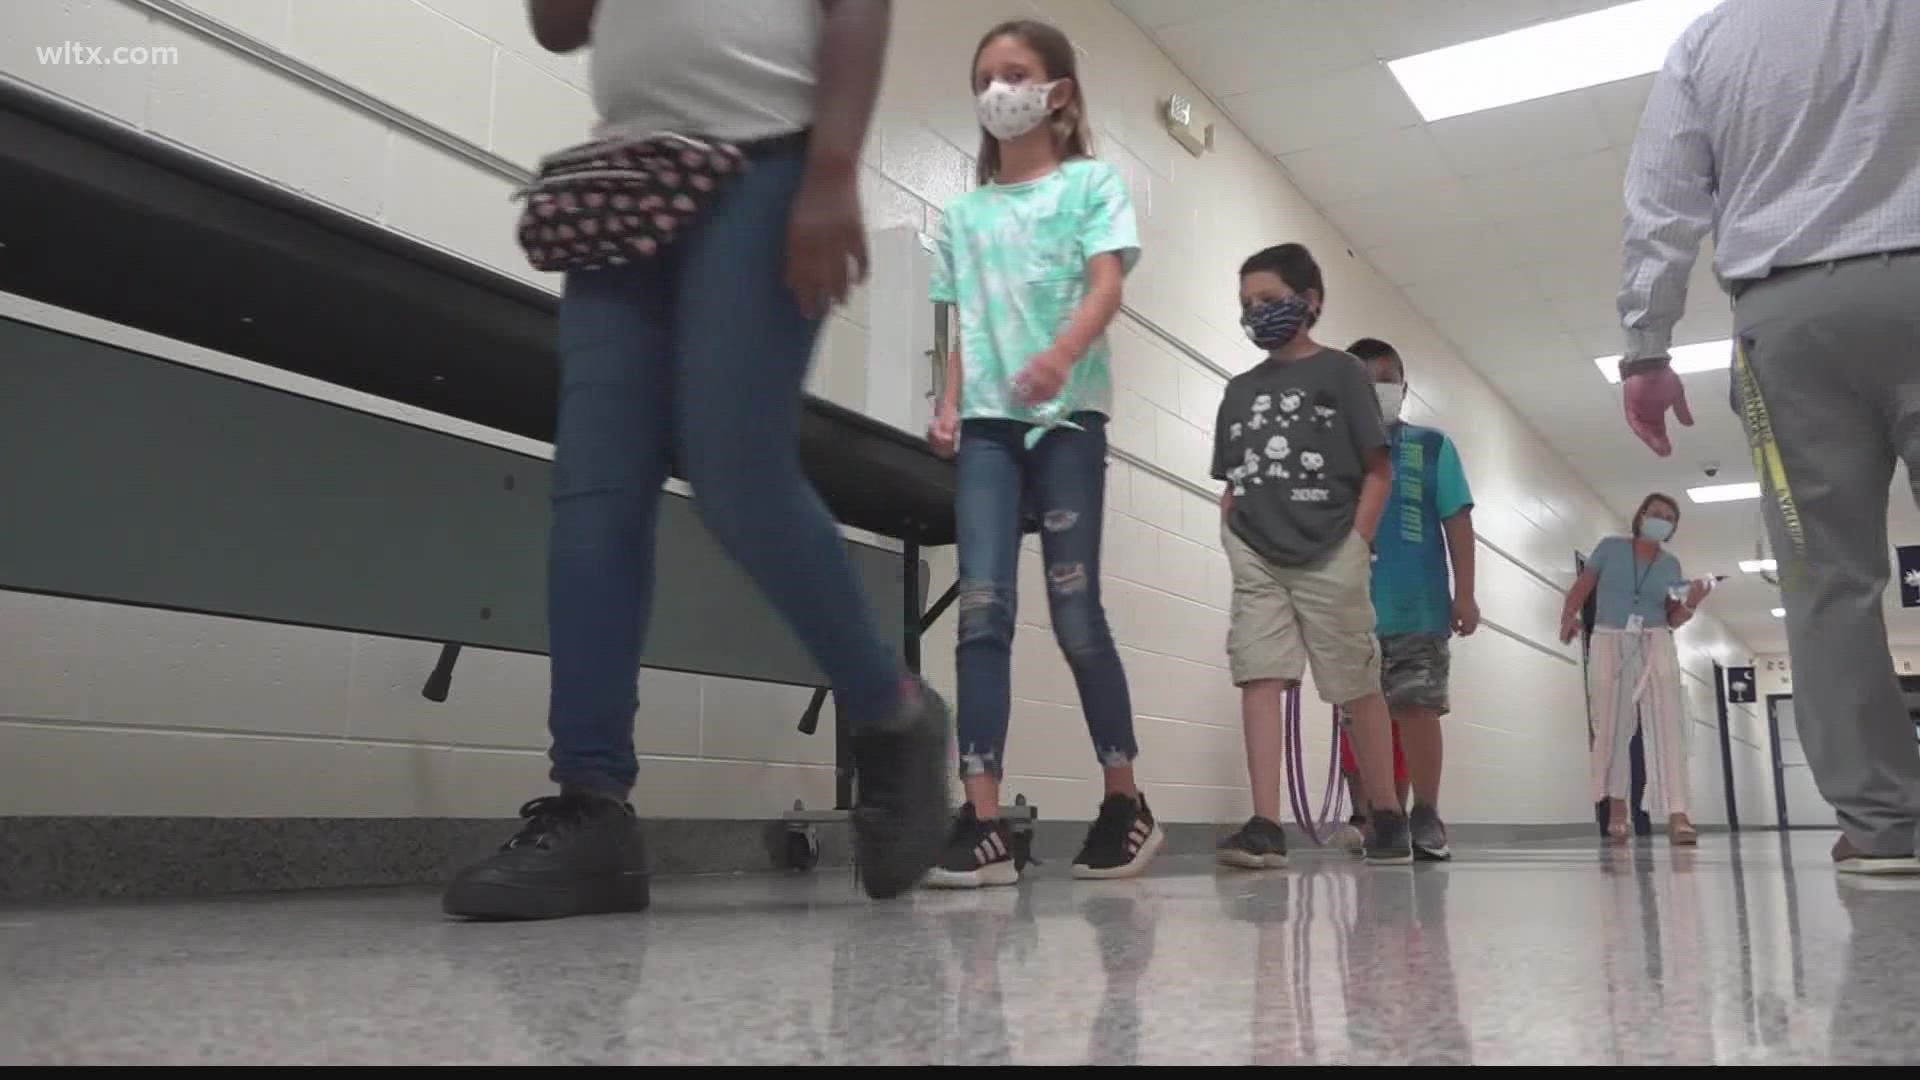 No one could give WLTX an answer how much money a district could lose in funding if they enforce mask wearing in schools.